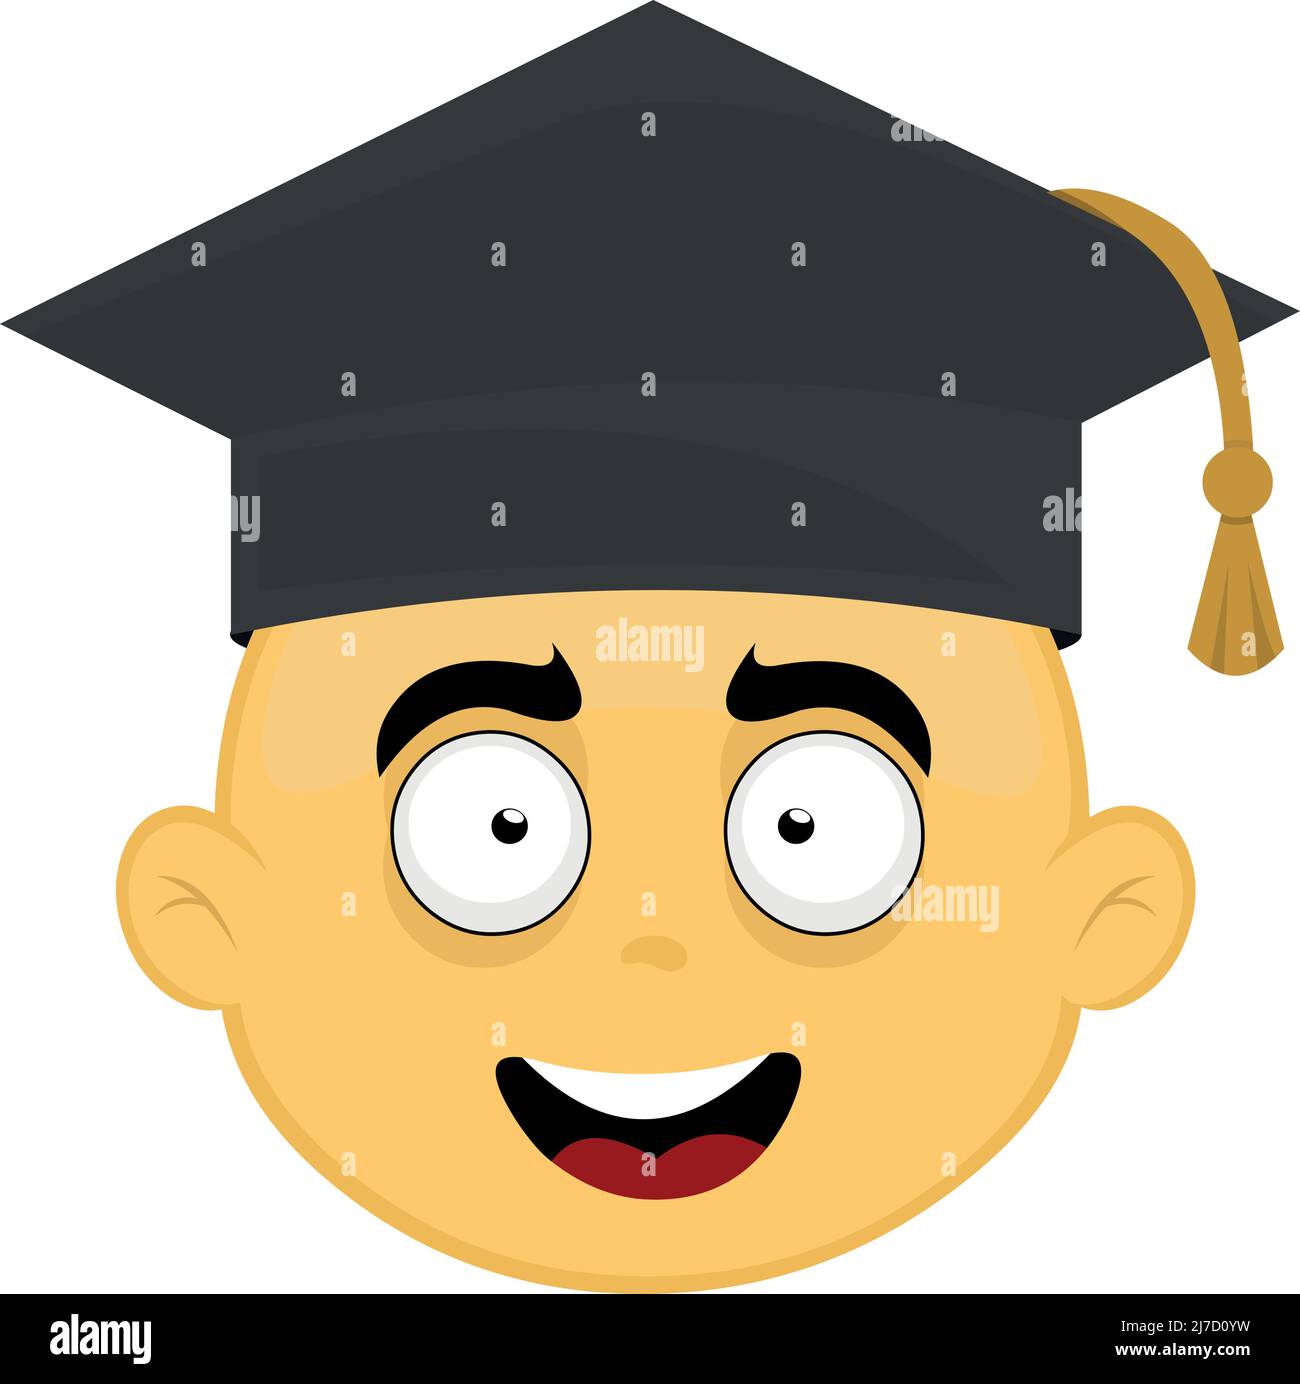 Vector illustration of the face of a yellow cartoon character with a graduation hat Stock Vector